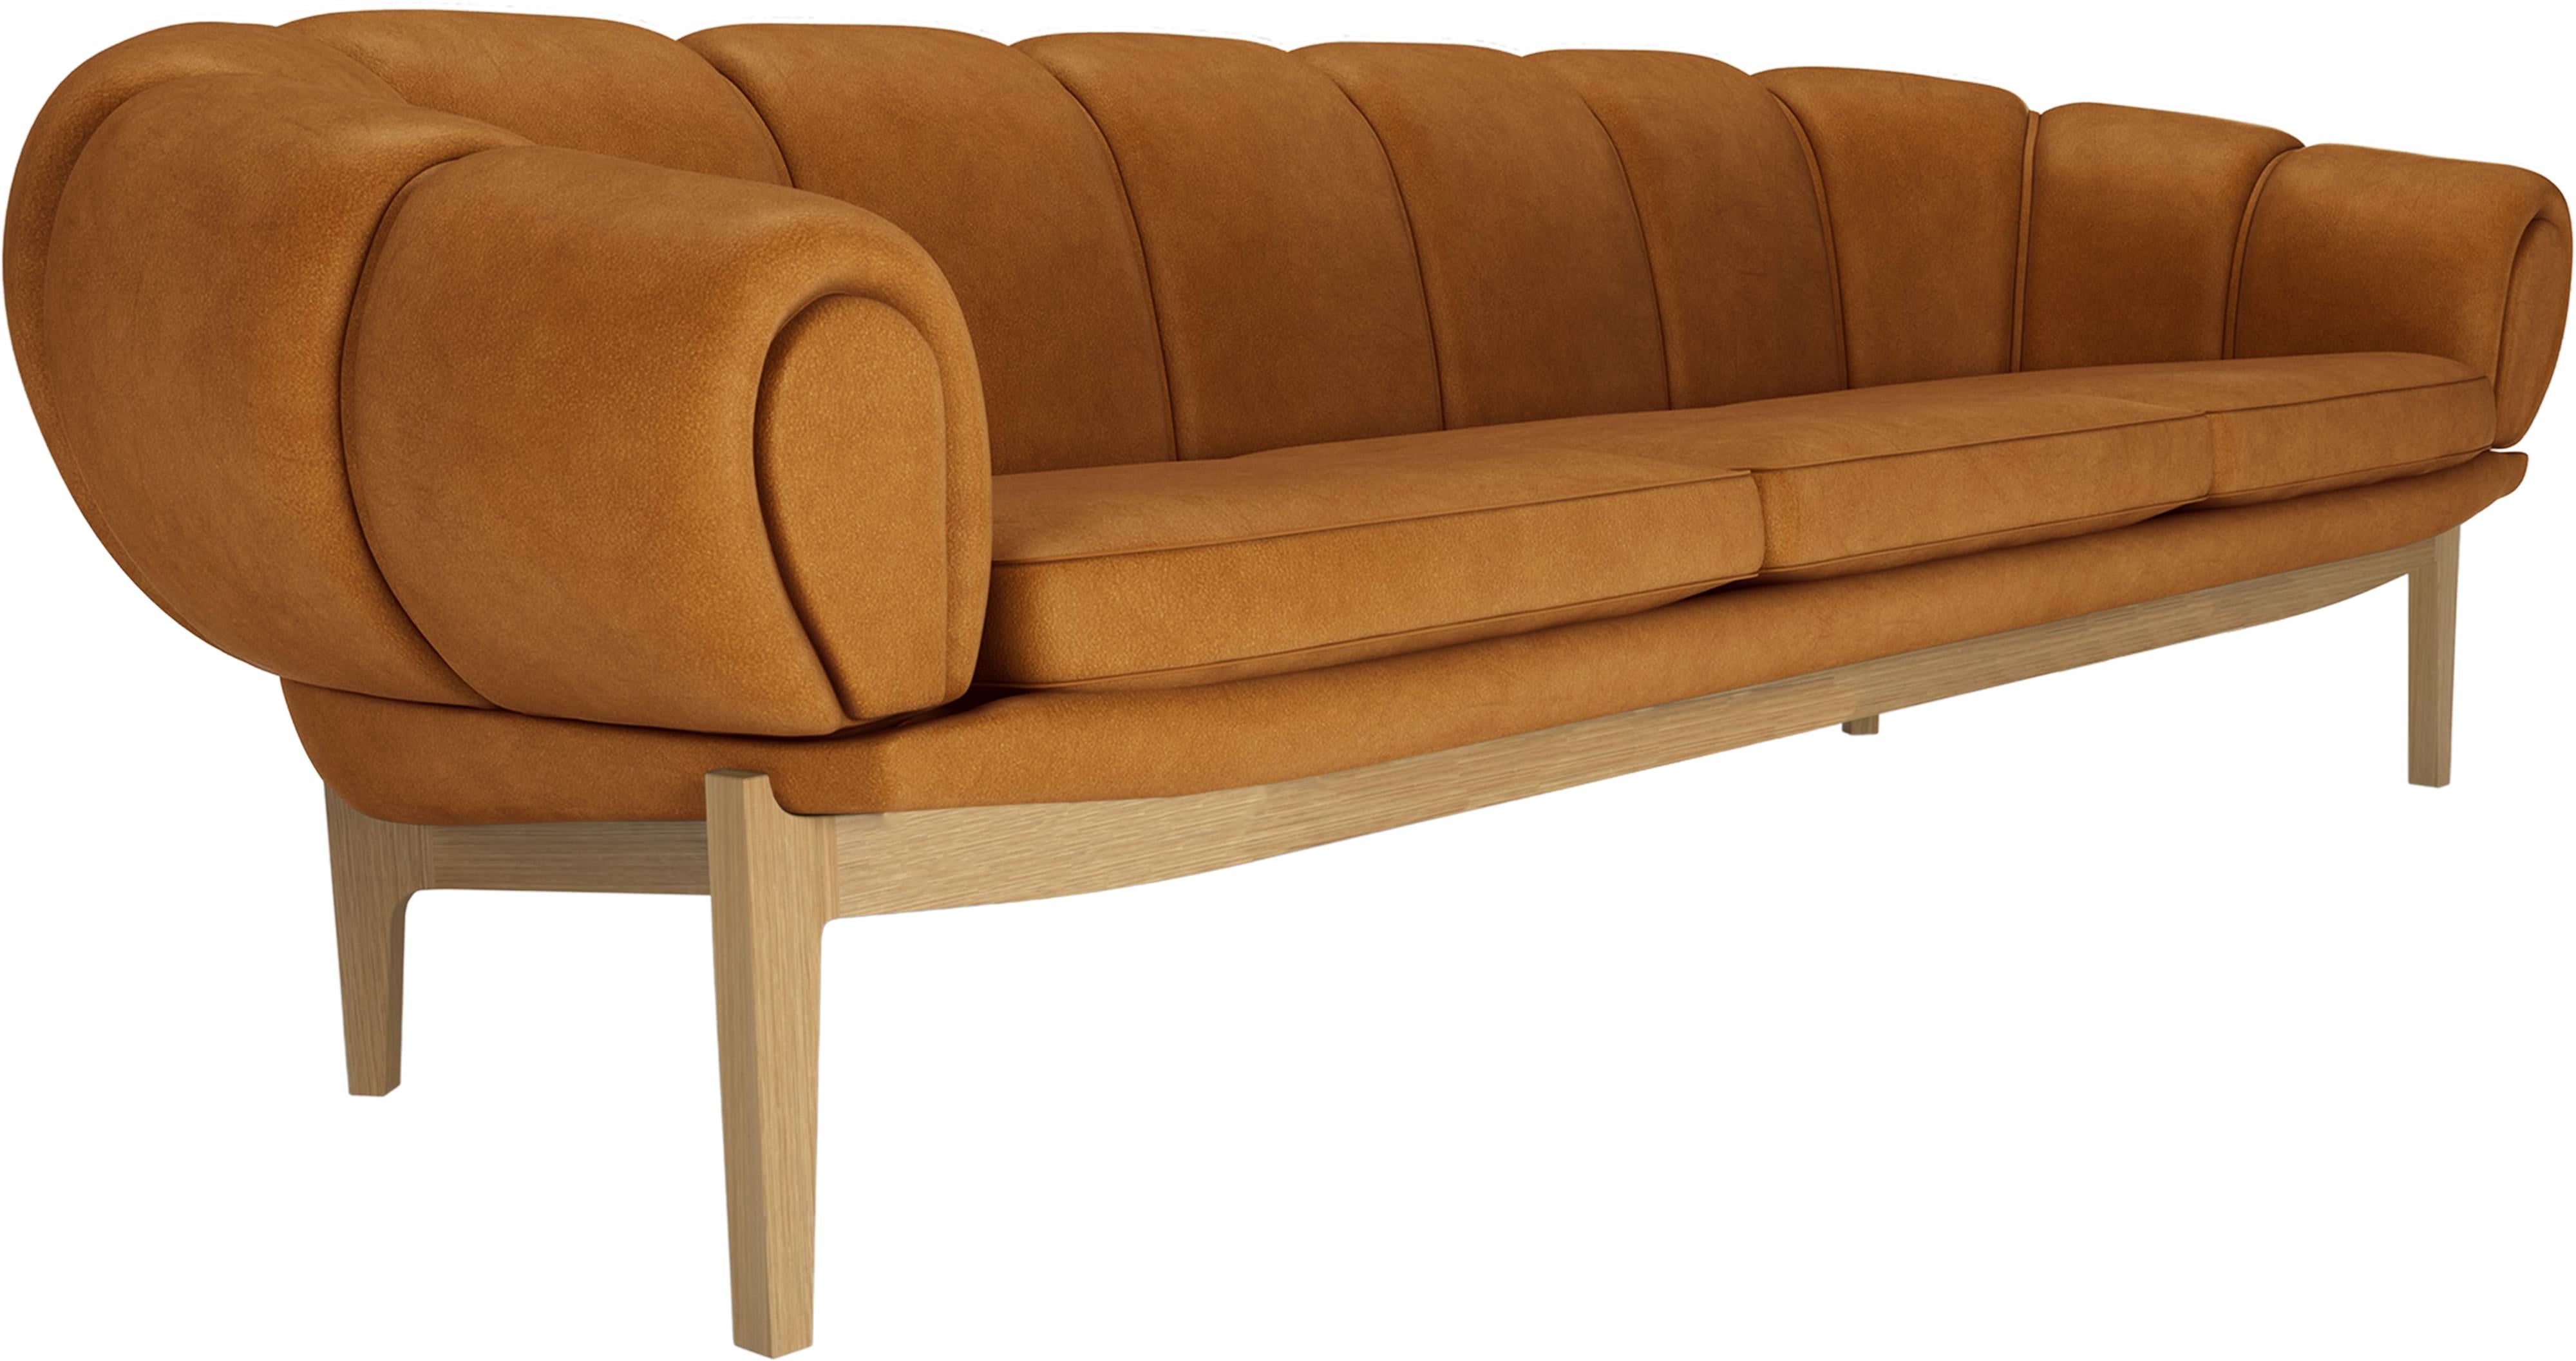 Leather 'Croissant' Sofa by Illum Wikkelsø for Gubi with Walnut Legs For Sale 5